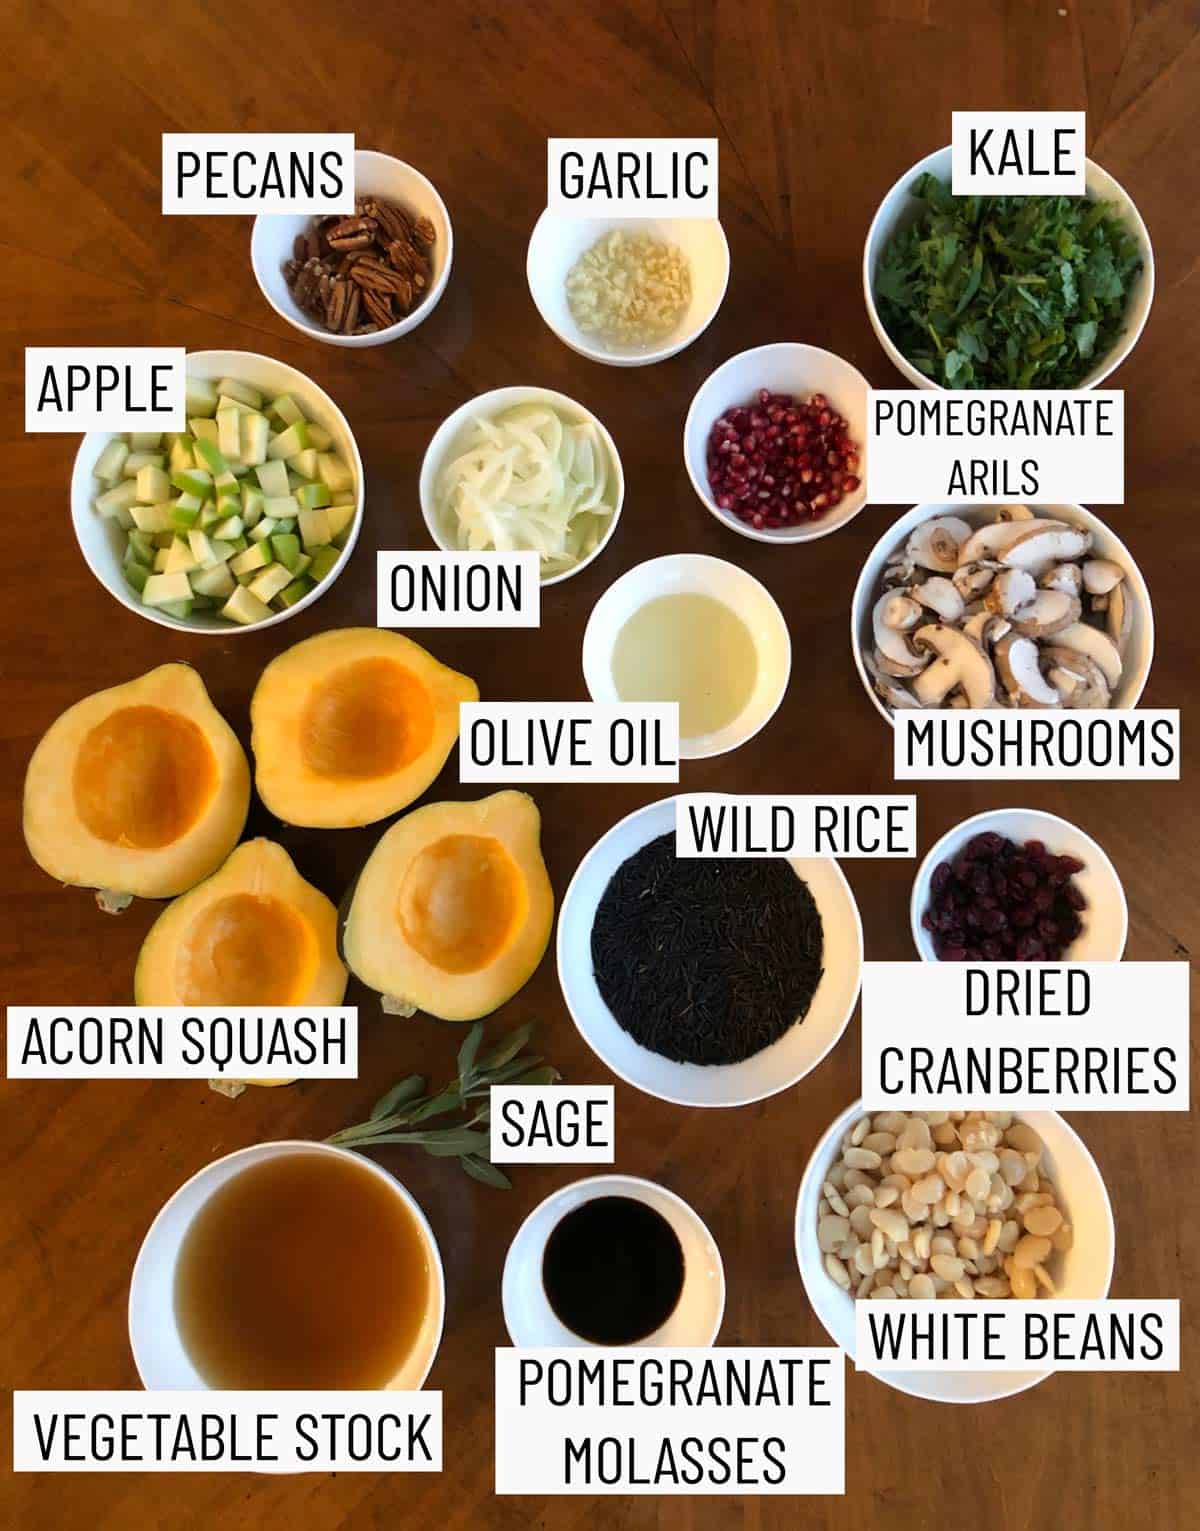 Over head view of ingredients for Stuffed Acorn Squash: pecans, garlic, kale, apple, onion, pomegranate arils, acorn squash, olive oil, mushrooms, wild rice, dried cranverries, sage, vegetable stock, pomegranate molasses, and white beans.